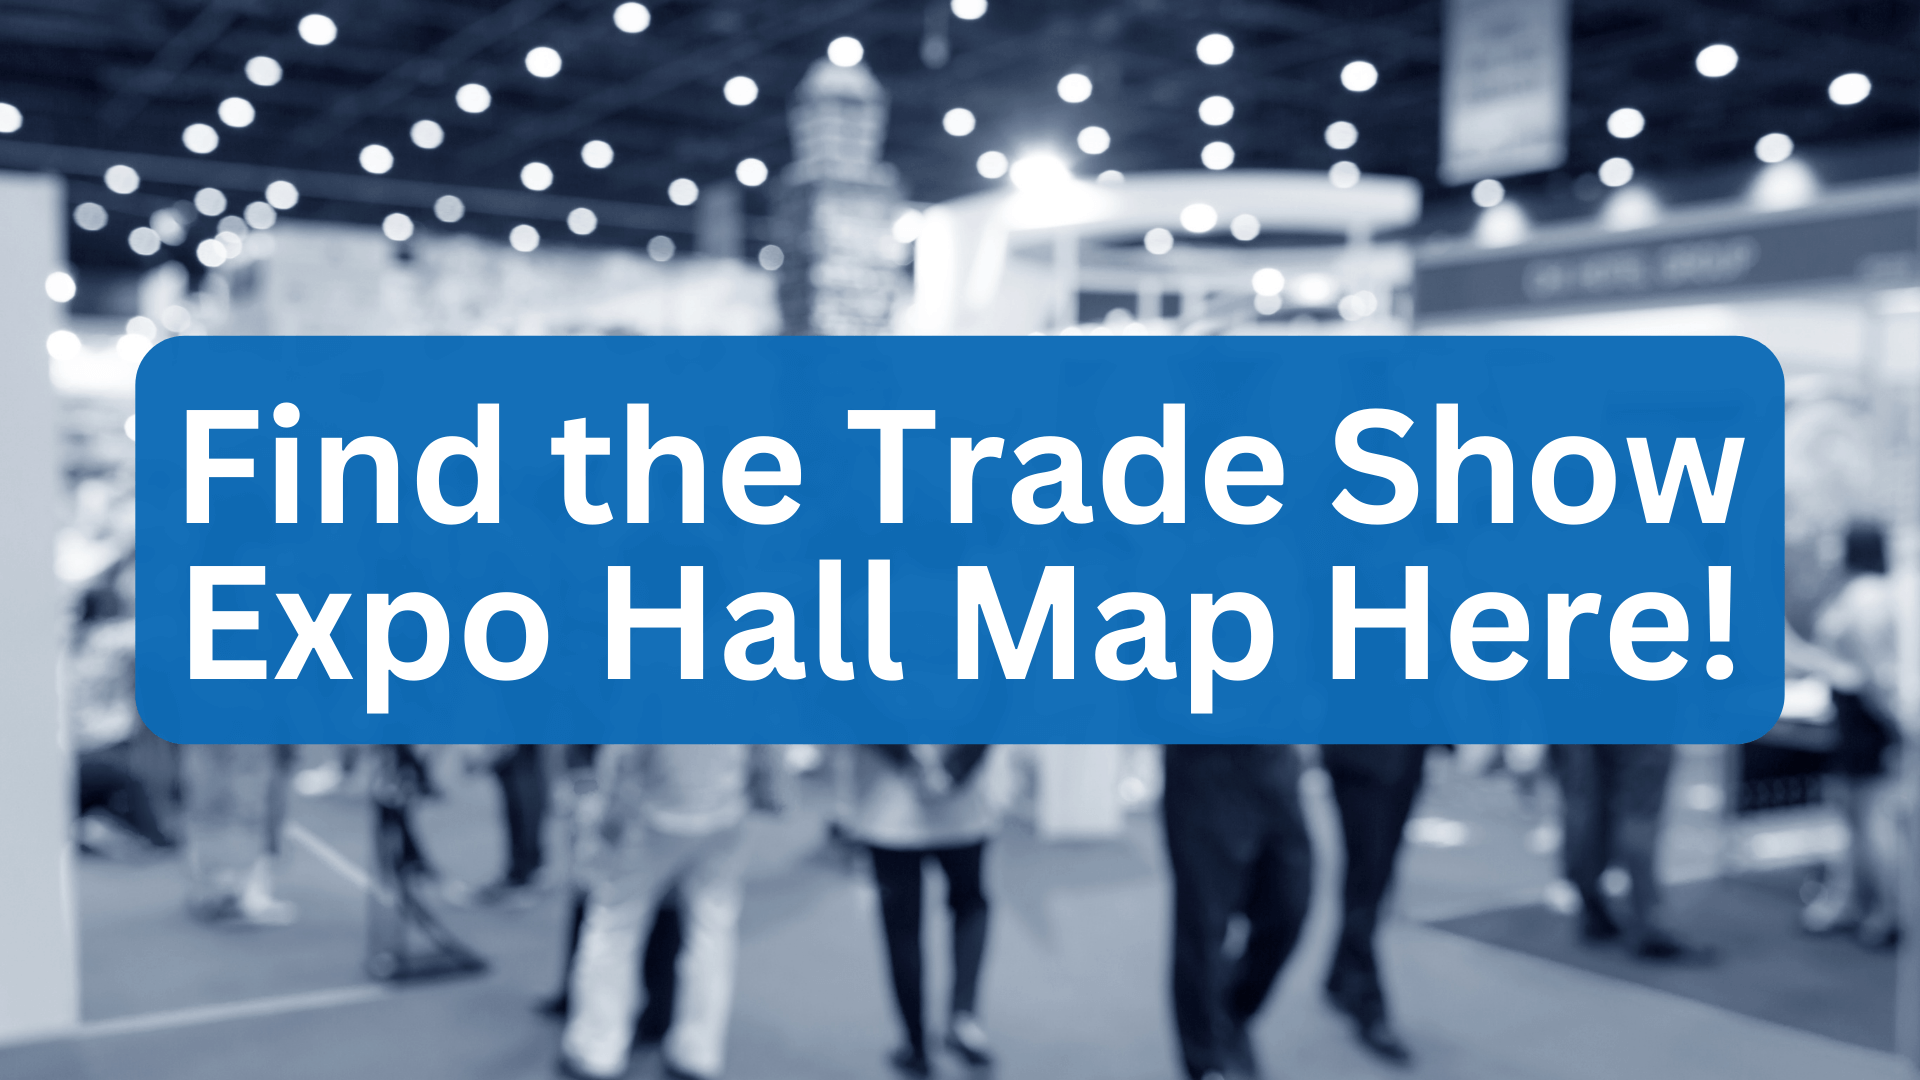 Find the Trade Show Expo Hall Here! (1)